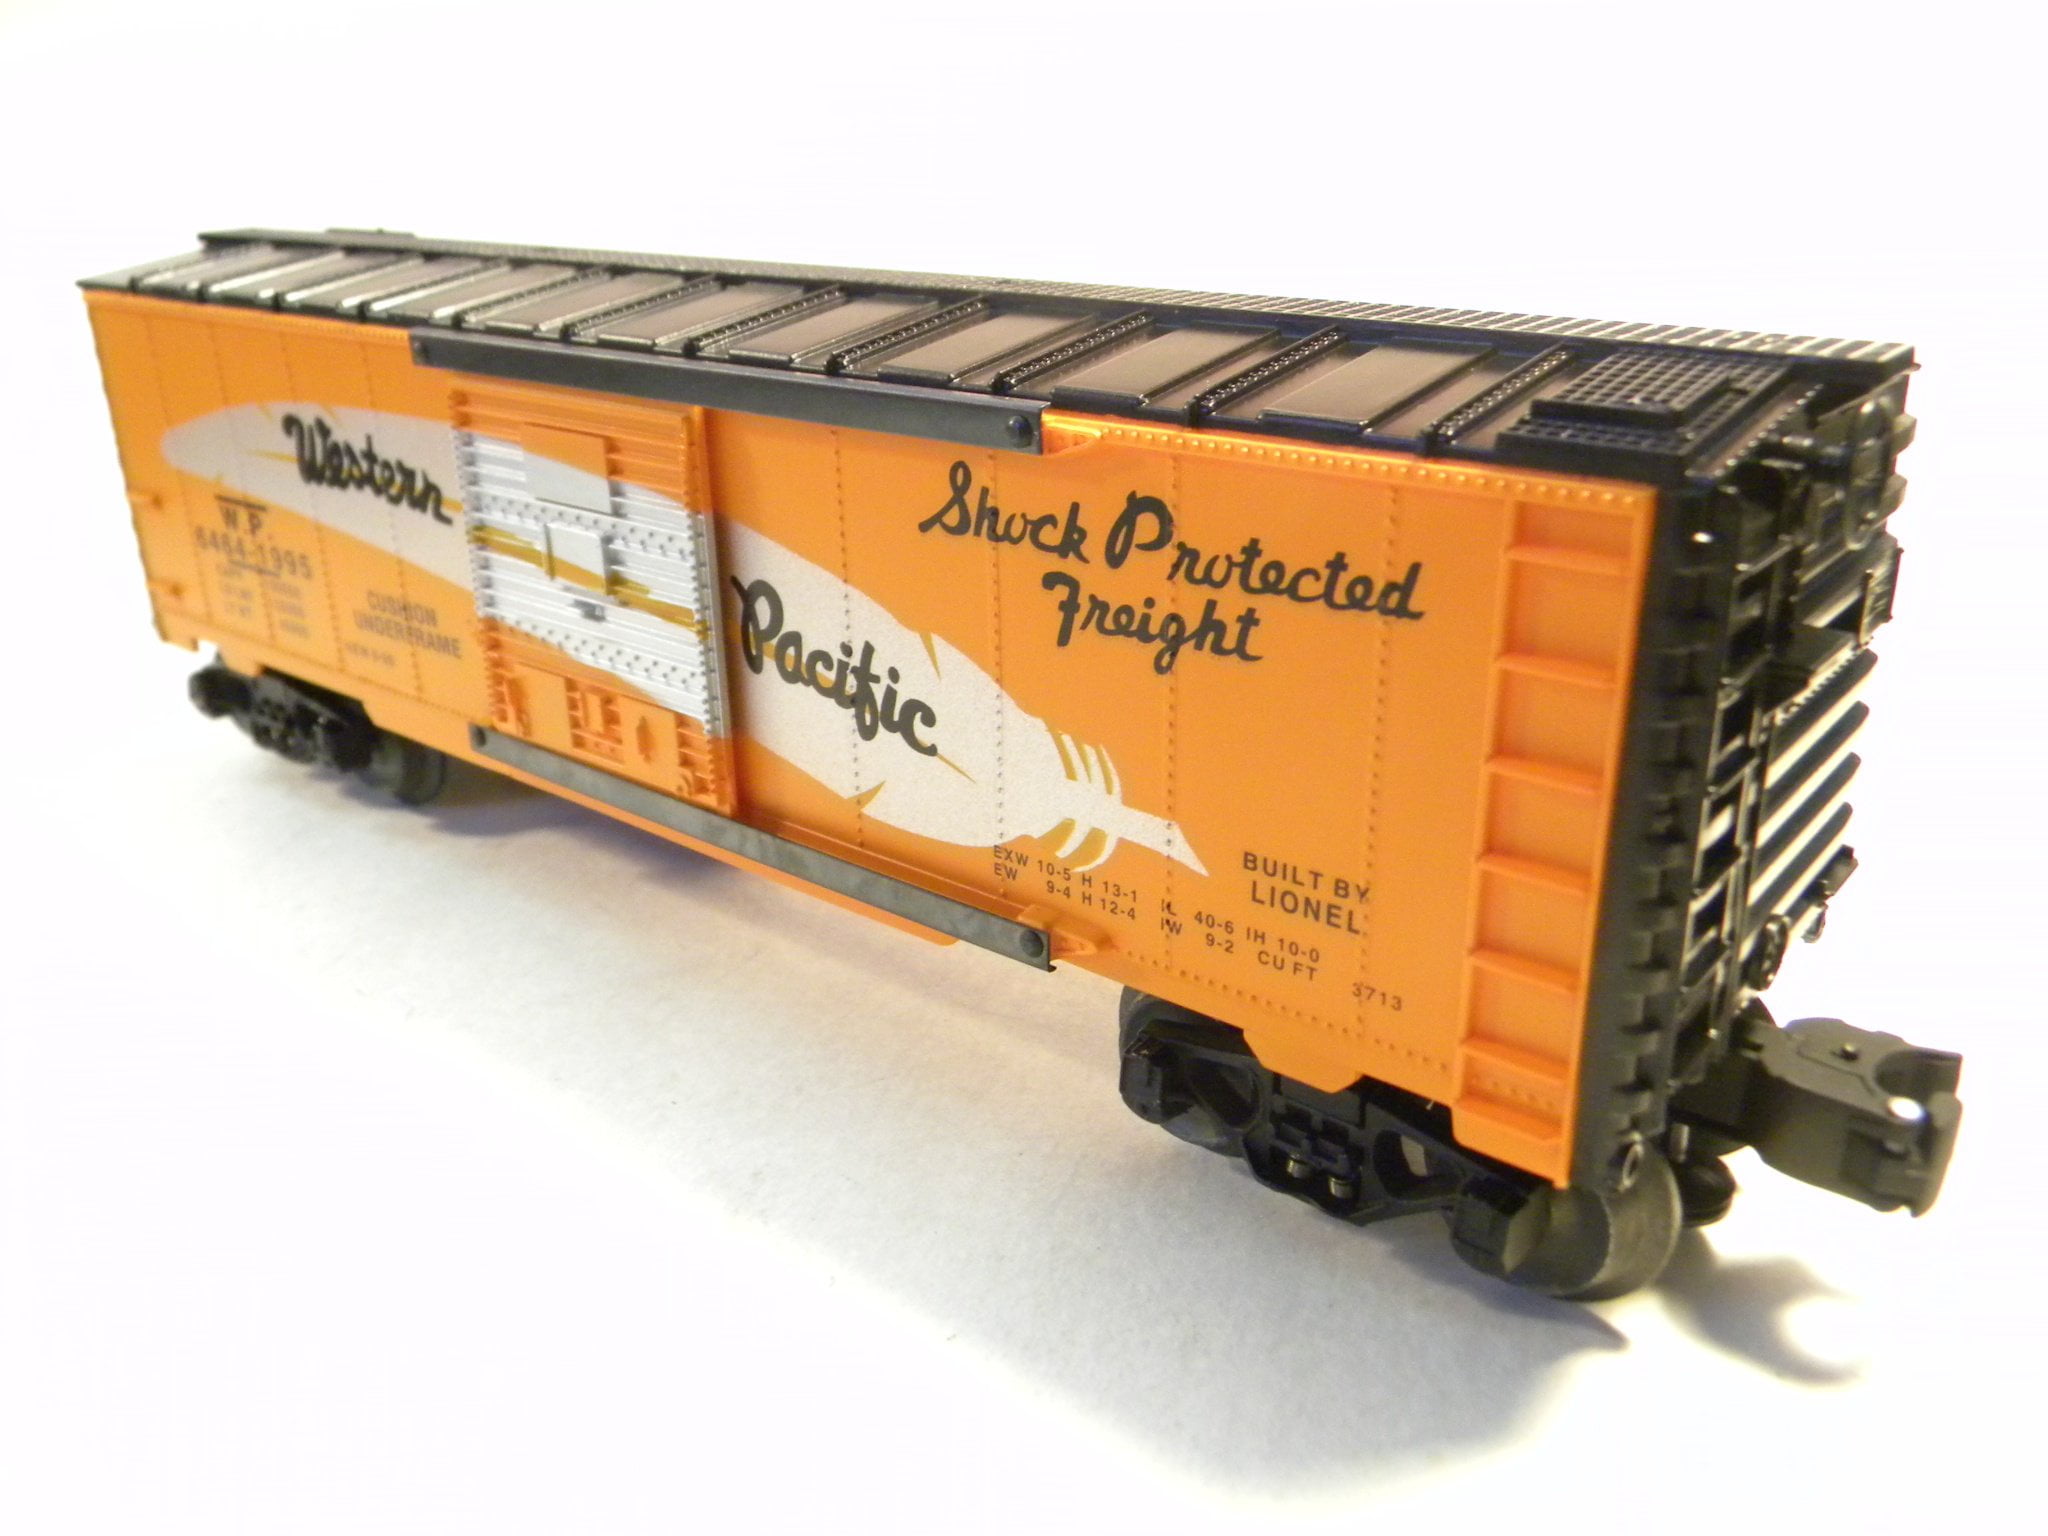 NEW WESTERN PACIFIC RAILROAD BOXCAR 0-GAUGE LIMITED EDITION 